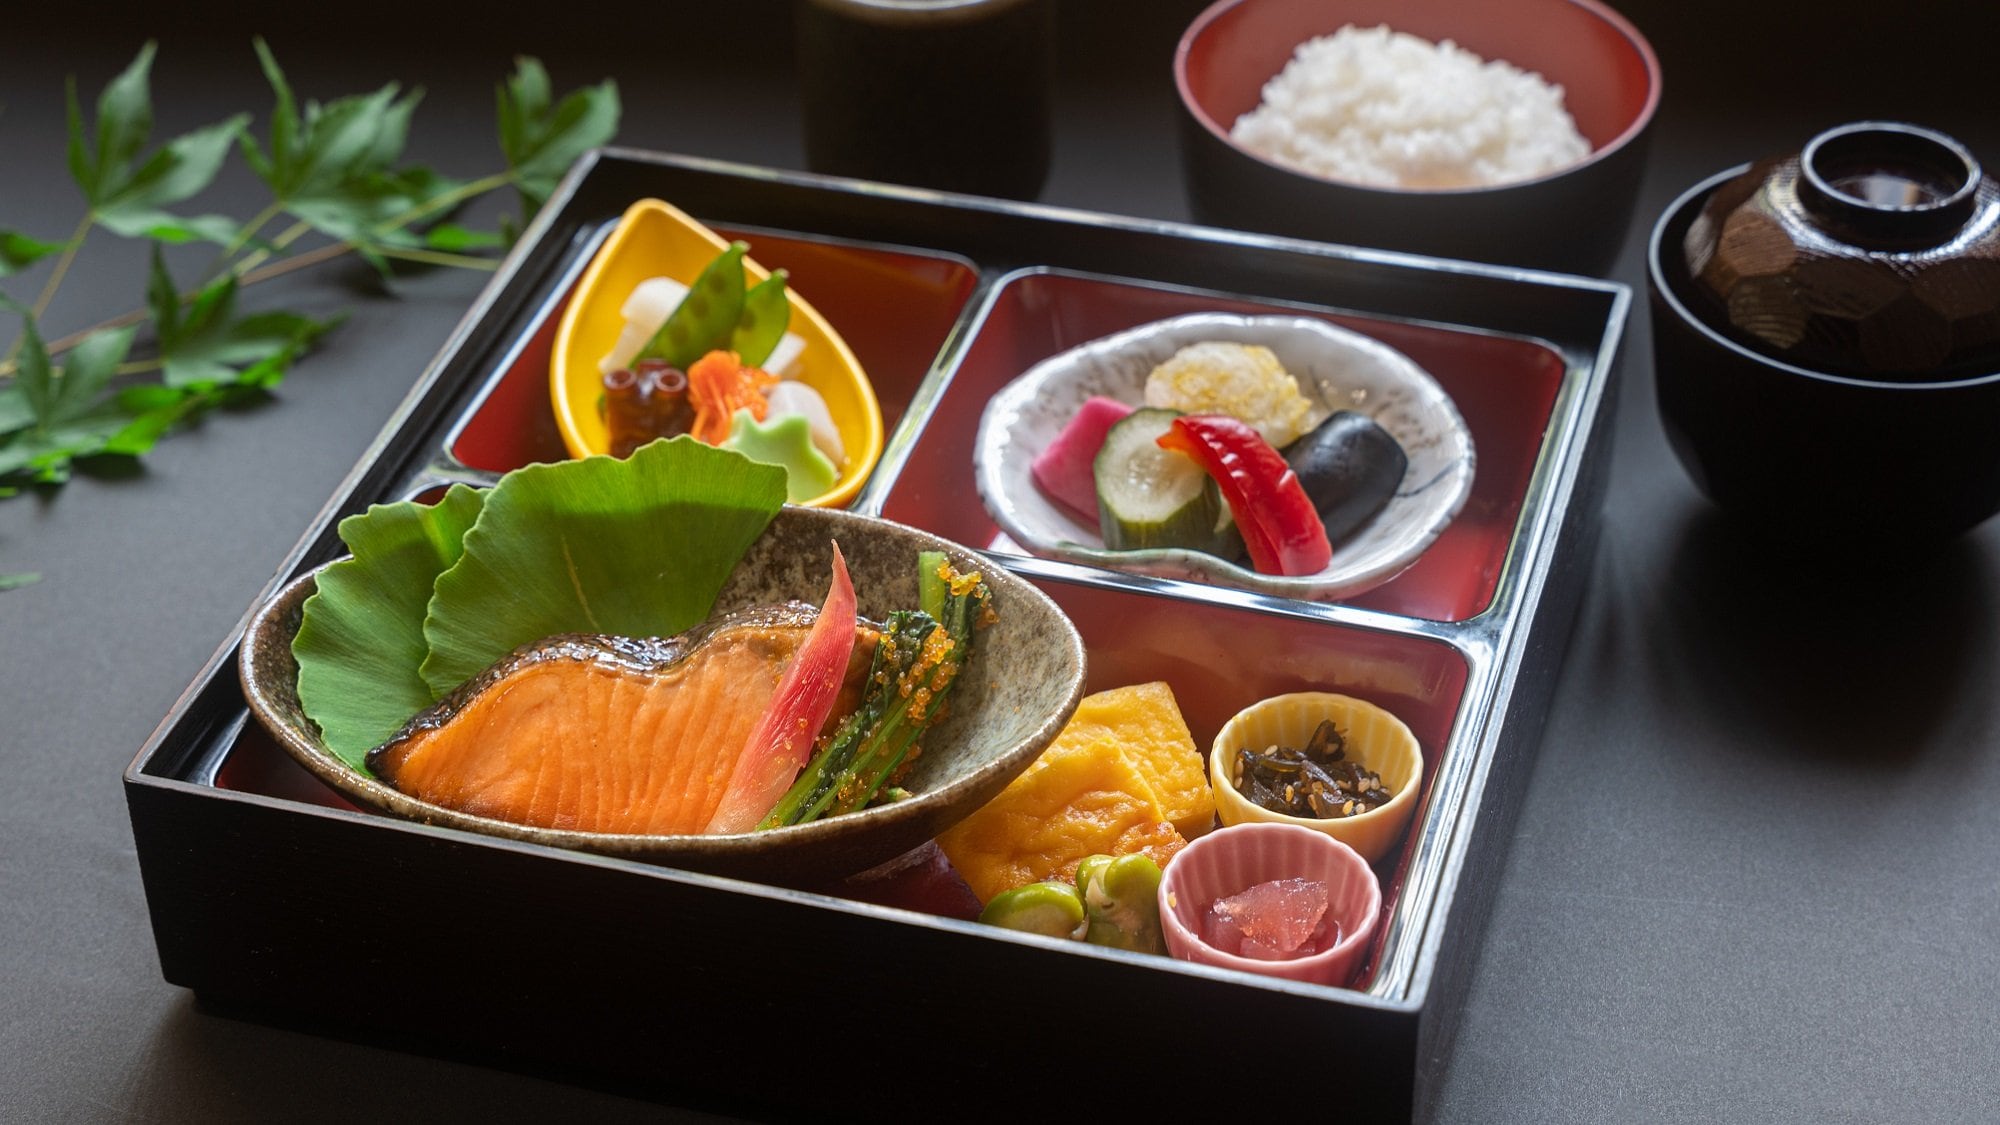 [Breakfast] Grilled fish, two small bowls, rice bran pickled vegetables, and freshly cooked rice are served in a Japanese style meal.